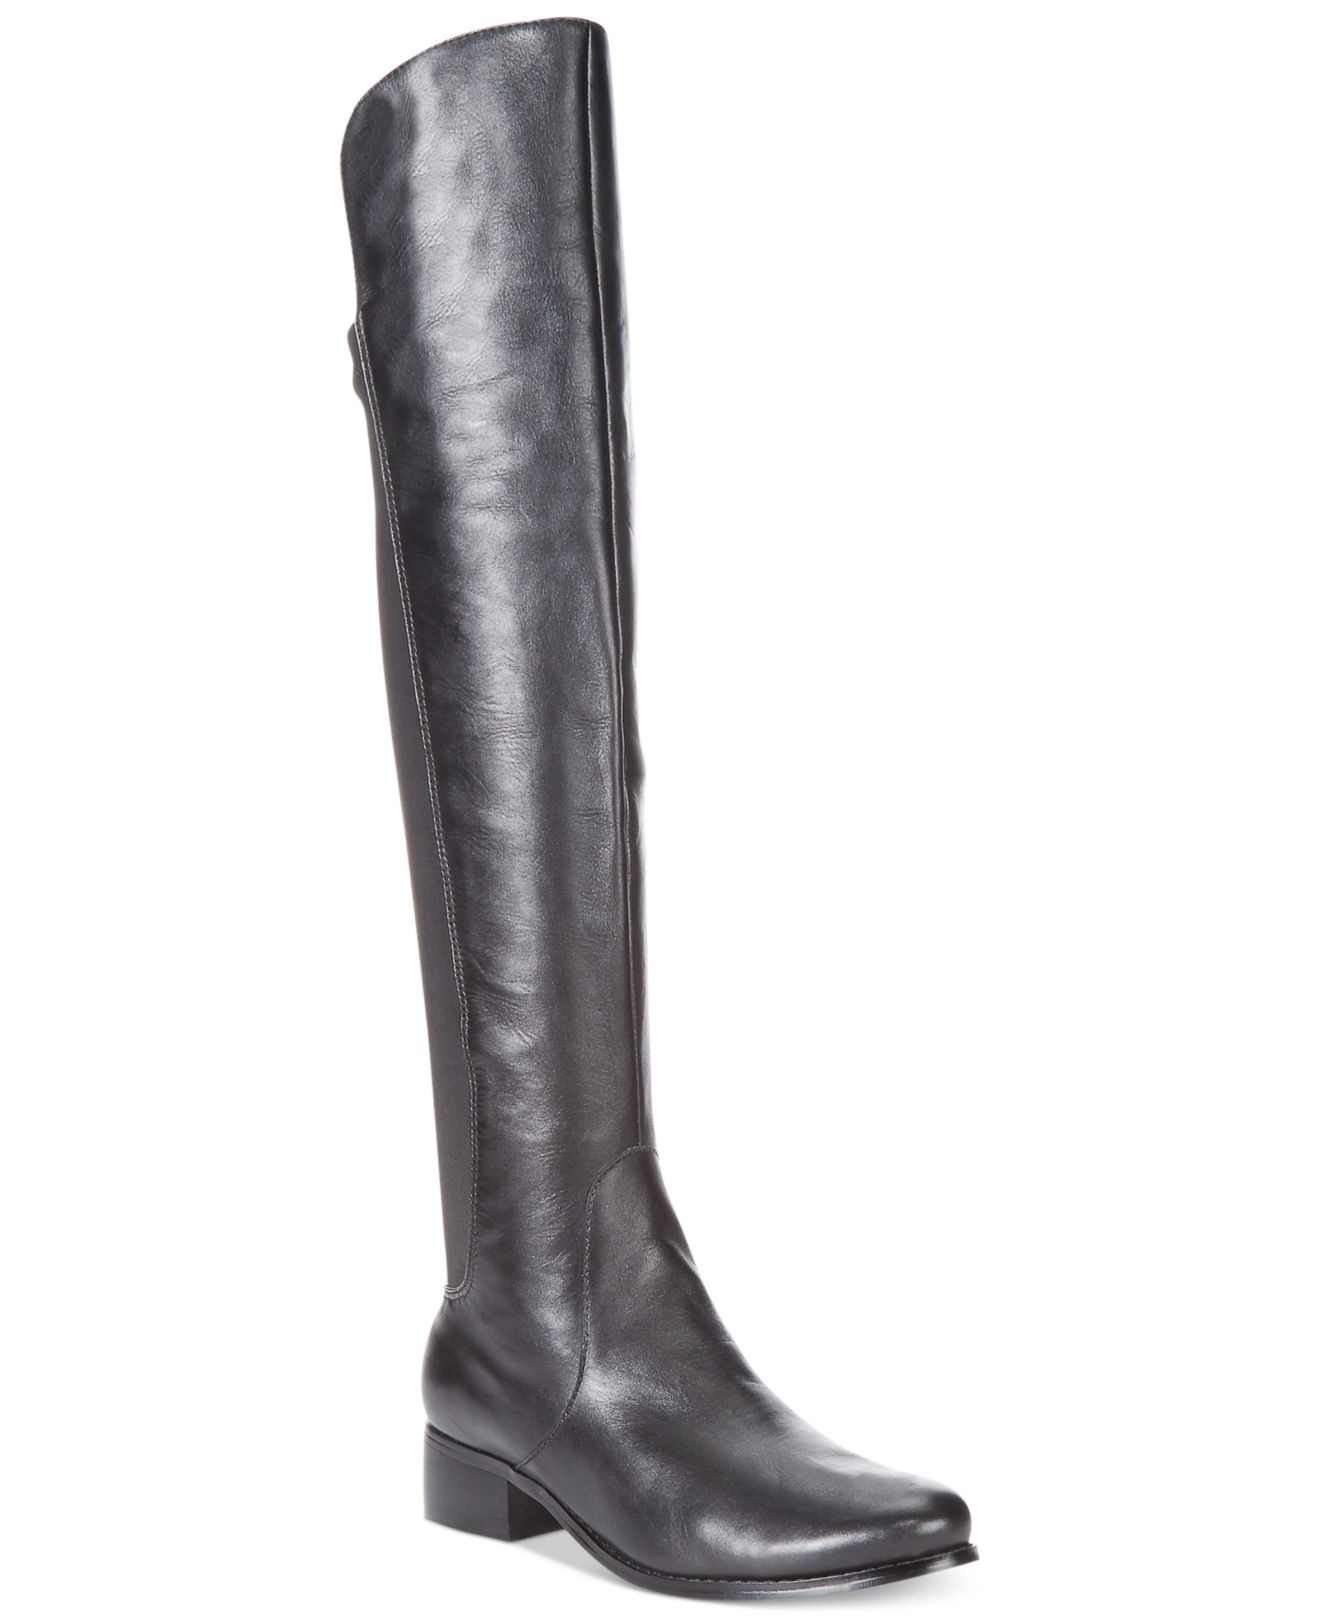 Charles David Jettison Over-The-Knee 50/50 Boots in Black | Lyst